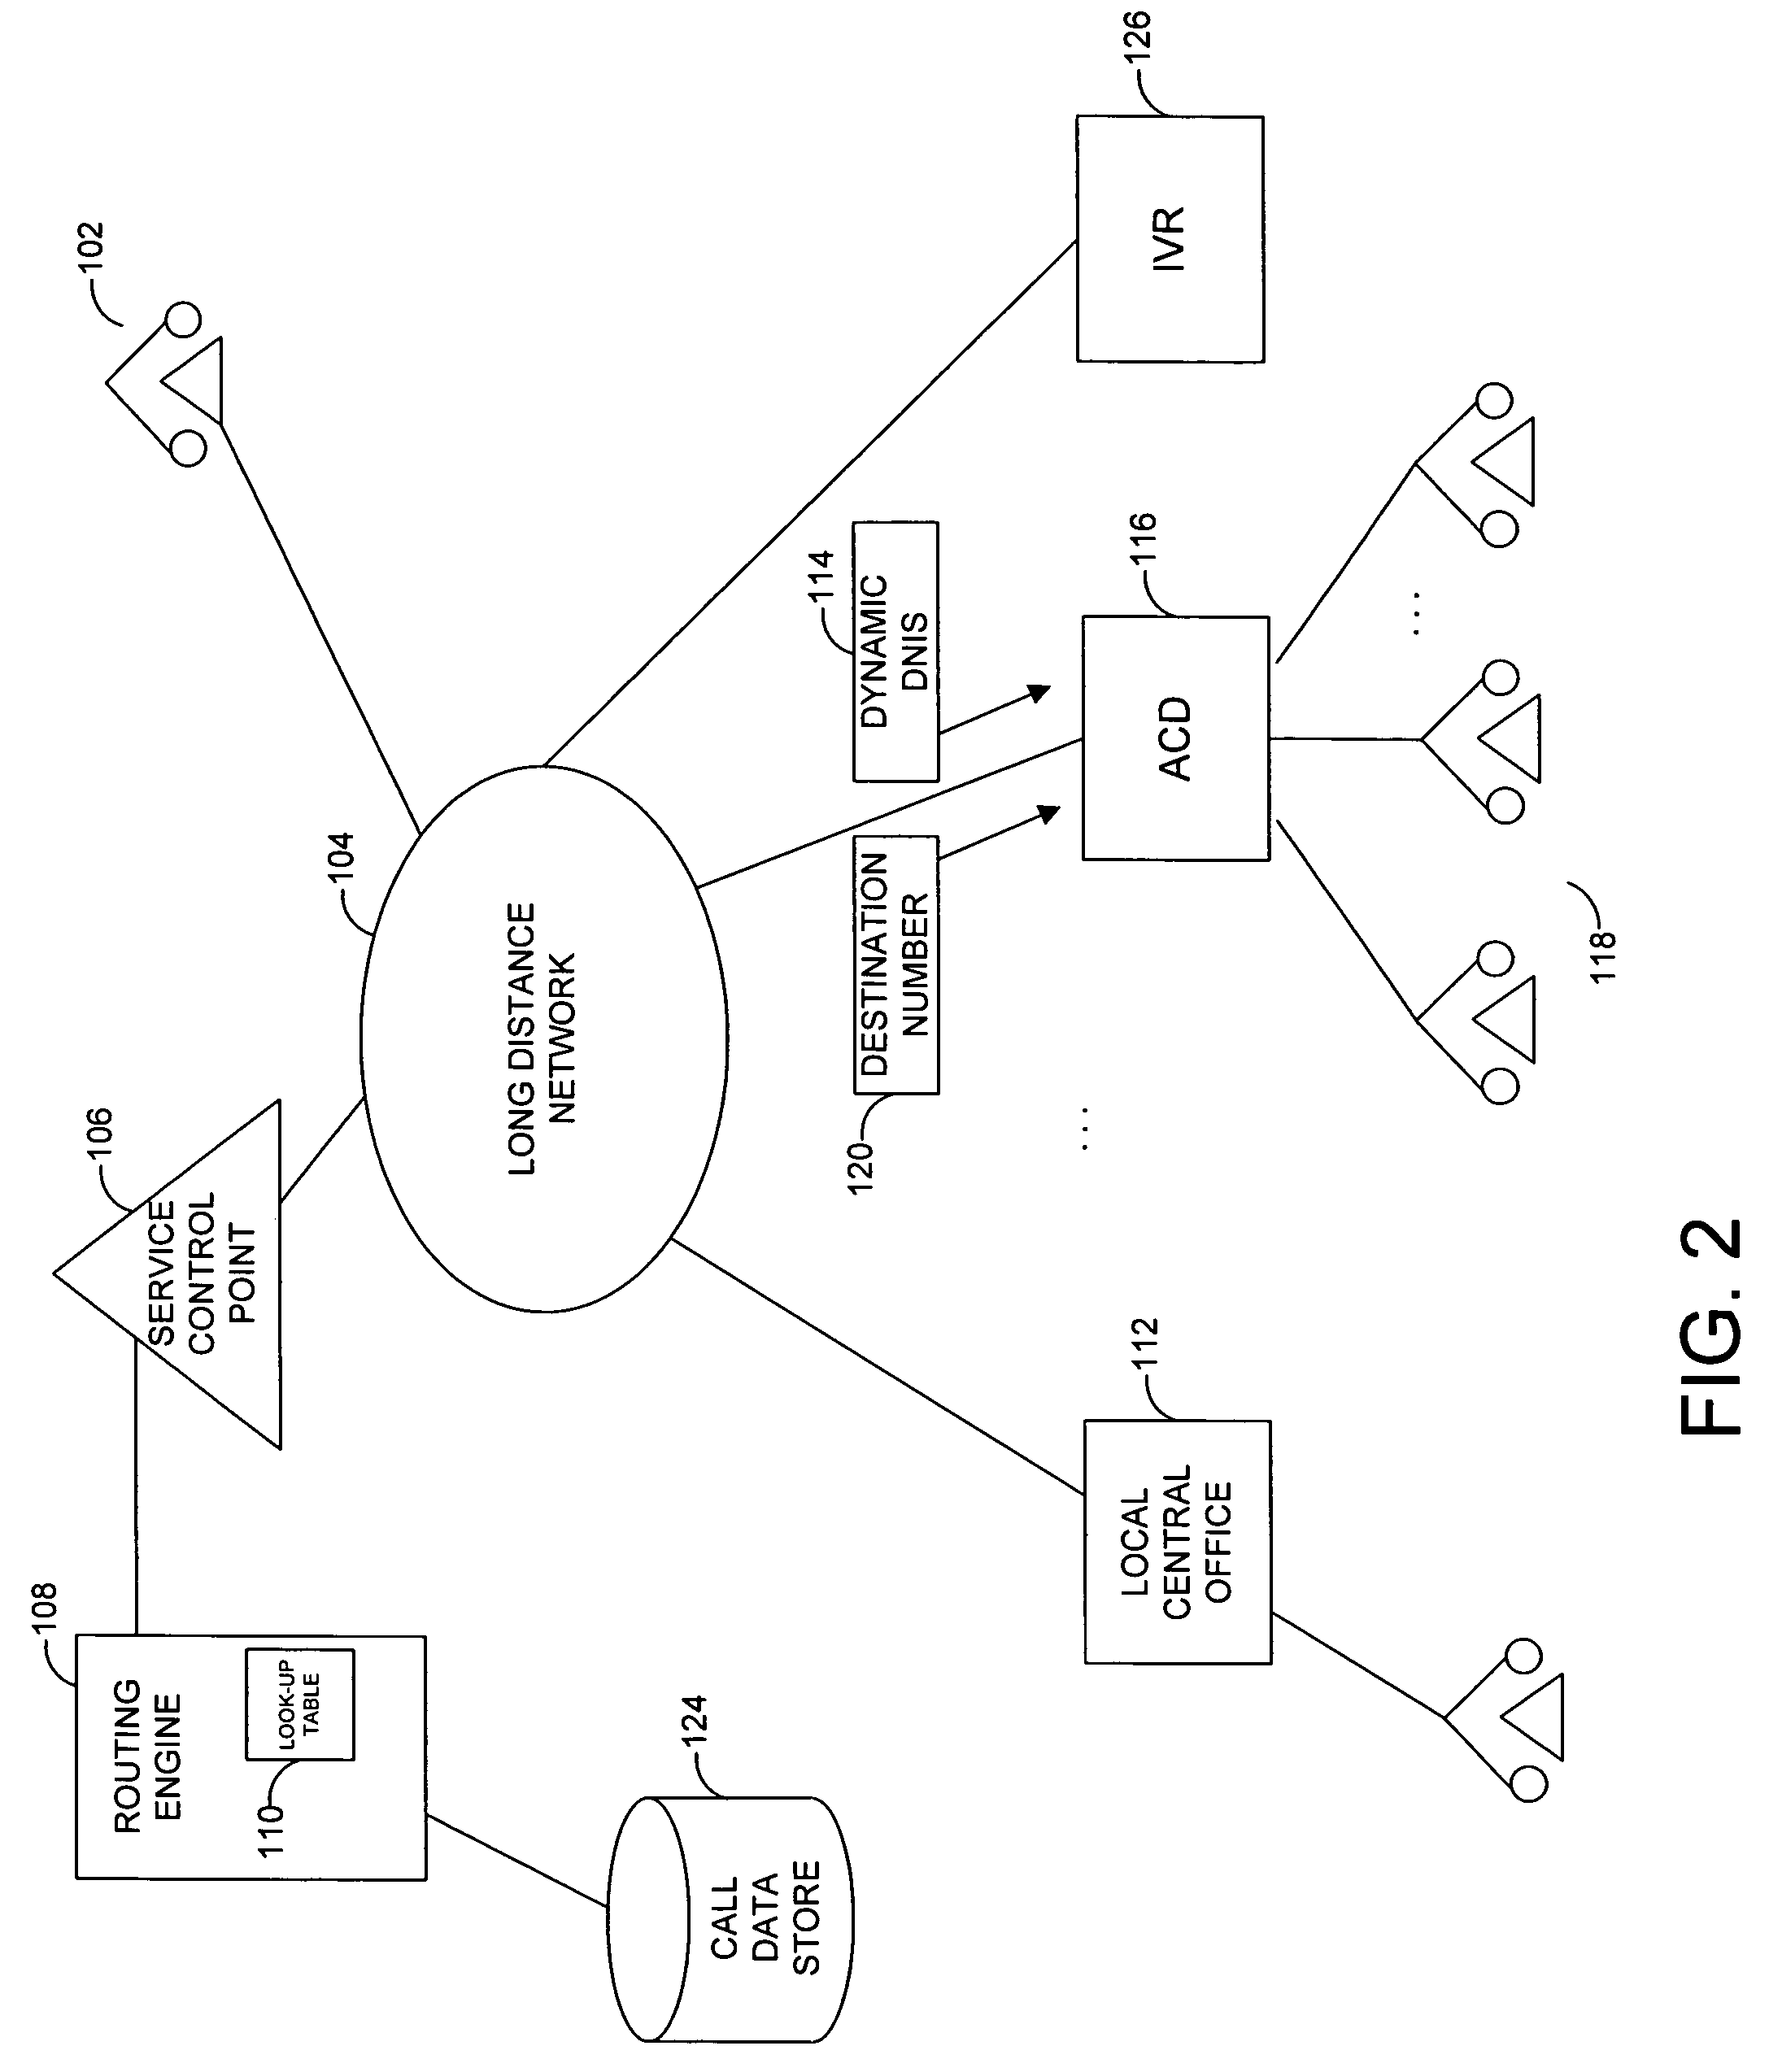 System and method for dynamic assignment of dialed number identification services in call distribution system